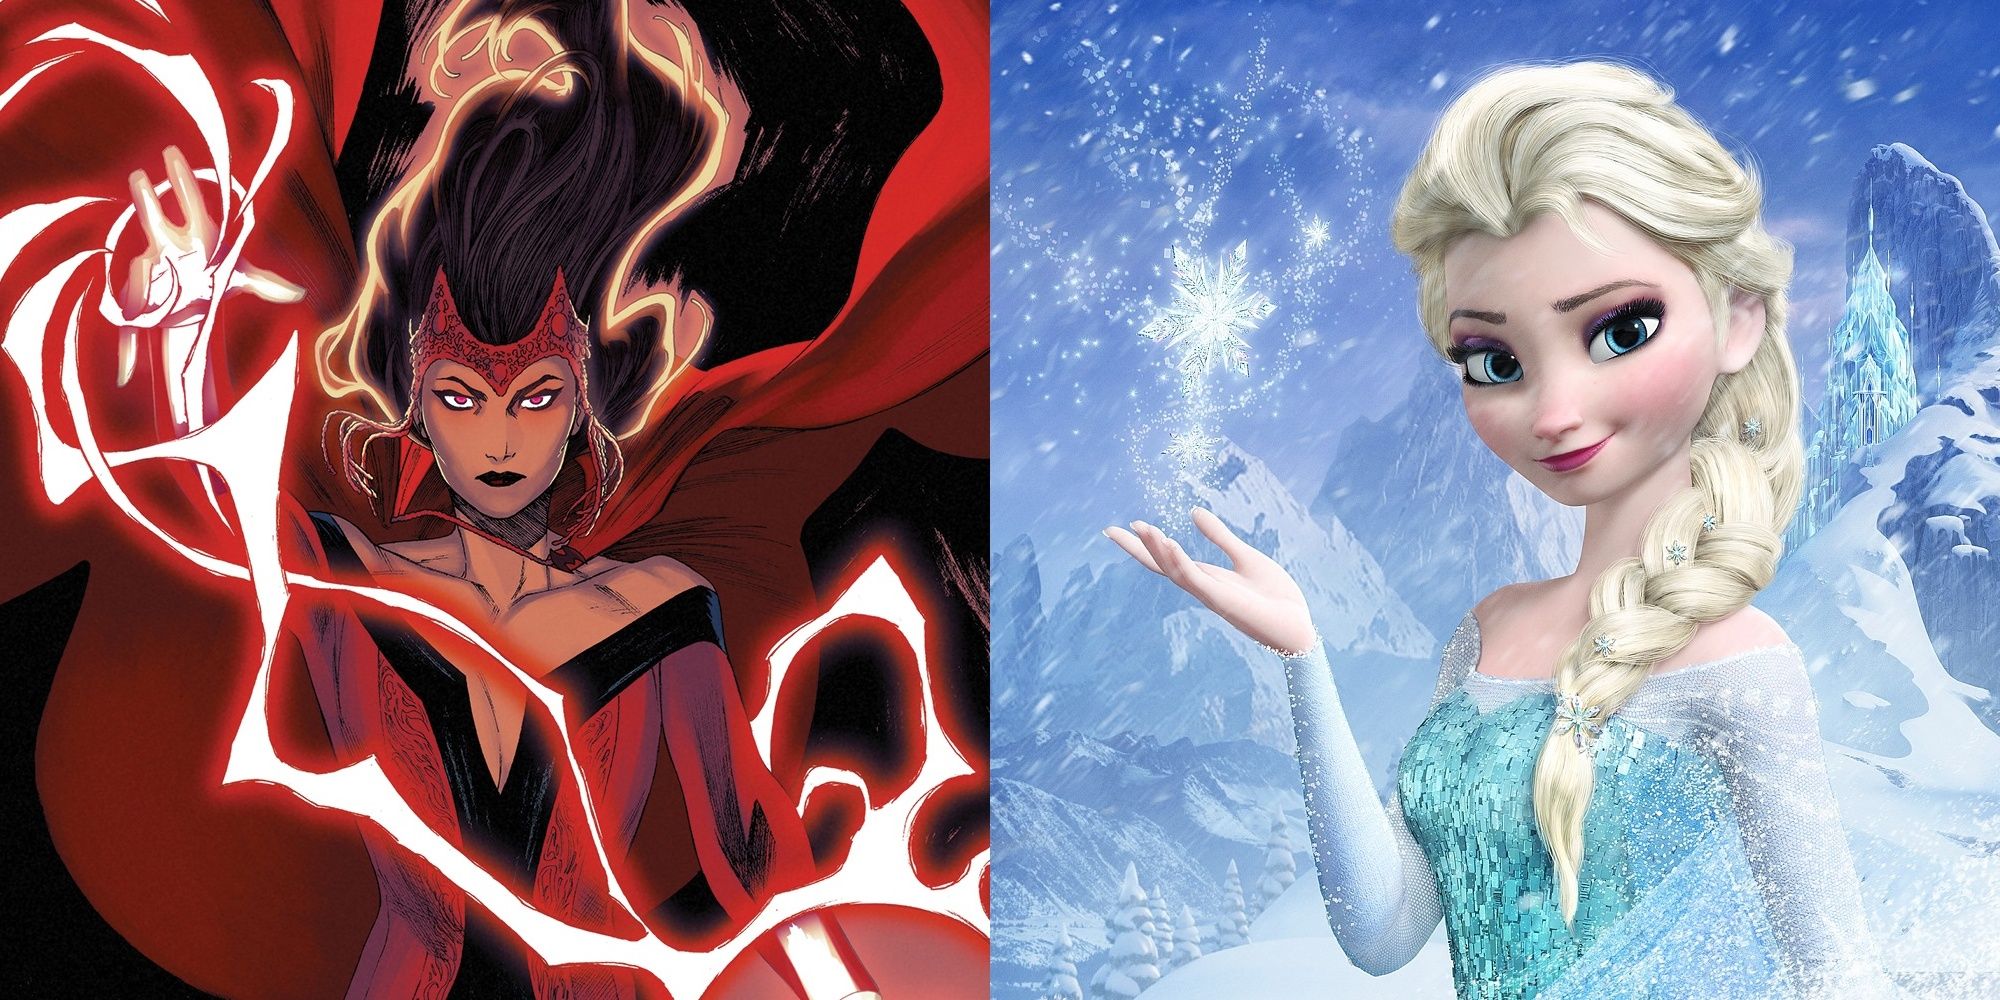 Scarlet Witch and Elsa